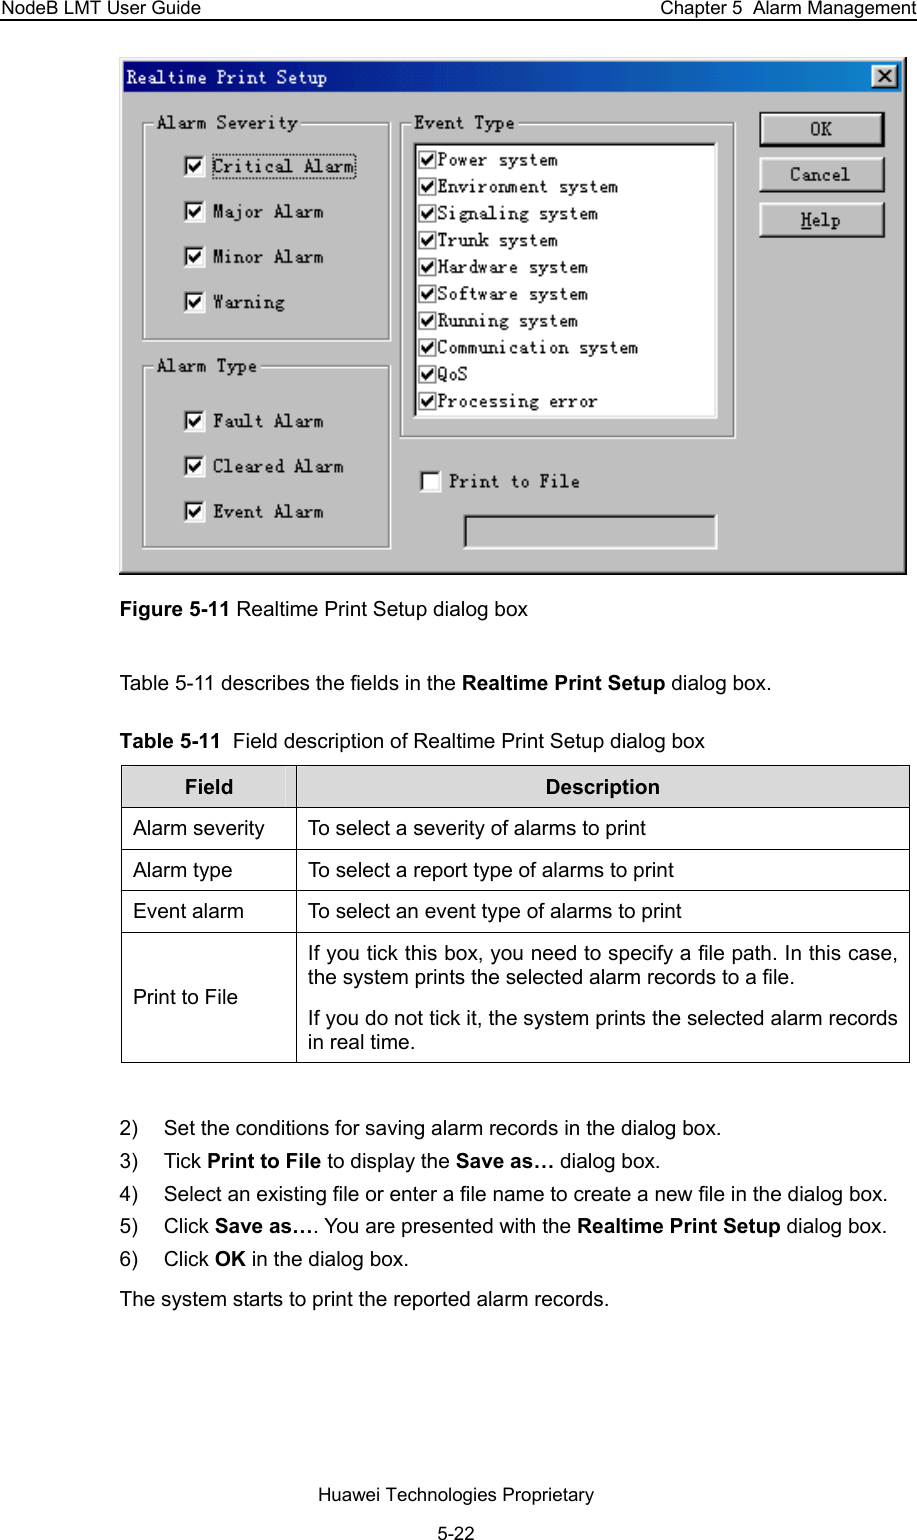 NodeB LMT User Guide  Chapter 5  Alarm Management  Figure 5-11 Realtime Print Setup dialog box Table 5-11 describes the fields in the Realtime Print Setup dialog box.  Table 5-11  Field description of Realtime Print Setup dialog box  Field   Description  Alarm severity   To select a severity of alarms to print Alarm type   To select a report type of alarms to print Event alarm   To select an event type of alarms to print Print to File  If you tick this box, you need to specify a file path. In this case, the system prints the selected alarm records to a file. If you do not tick it, the system prints the selected alarm records in real time.  2)  Set the conditions for saving alarm records in the dialog box.  3) Tick Print to File to display the Save as… dialog box.  4)  Select an existing file or enter a file name to create a new file in the dialog box.  5) Click Save as…. You are presented with the Realtime Print Setup dialog box.  6) Click OK in the dialog box.  The system starts to print the reported alarm records.  Huawei Technologies Proprietary 5-22 